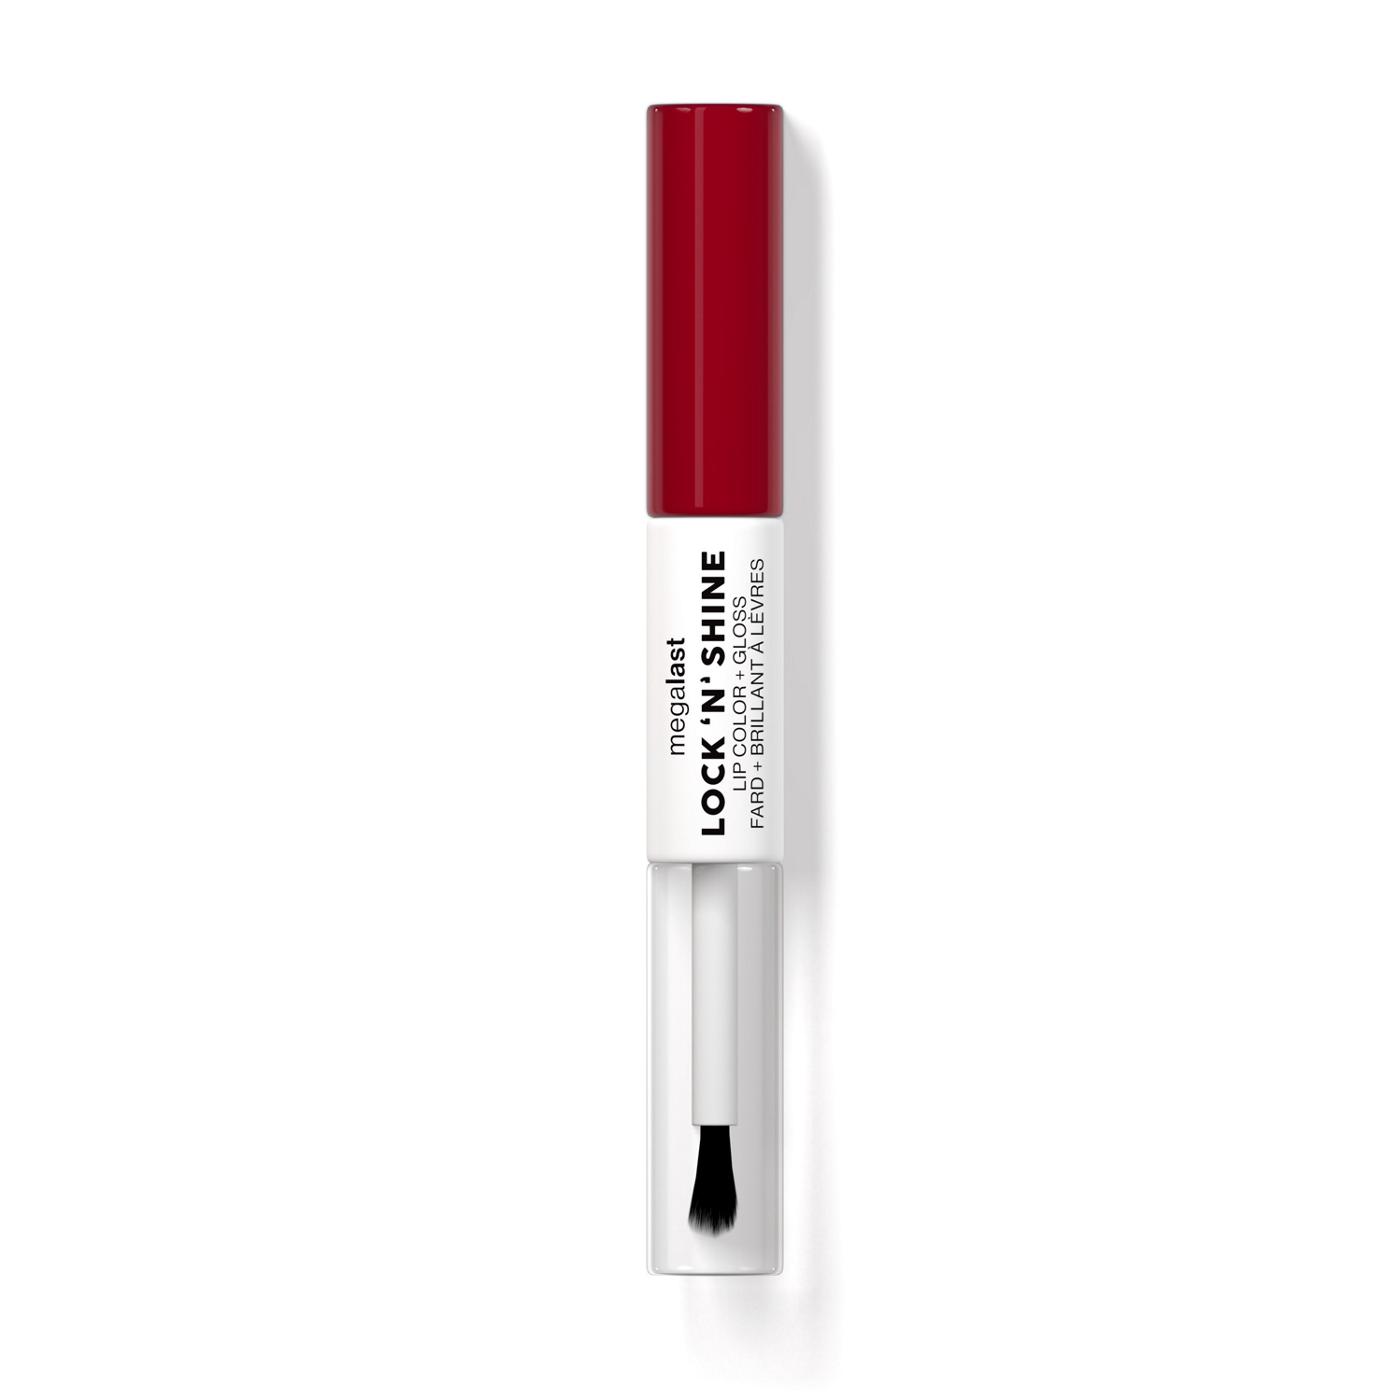 Wet n Wild MegaLast Lock N Shine Lip Gloss - Red Y for You; image 1 of 3